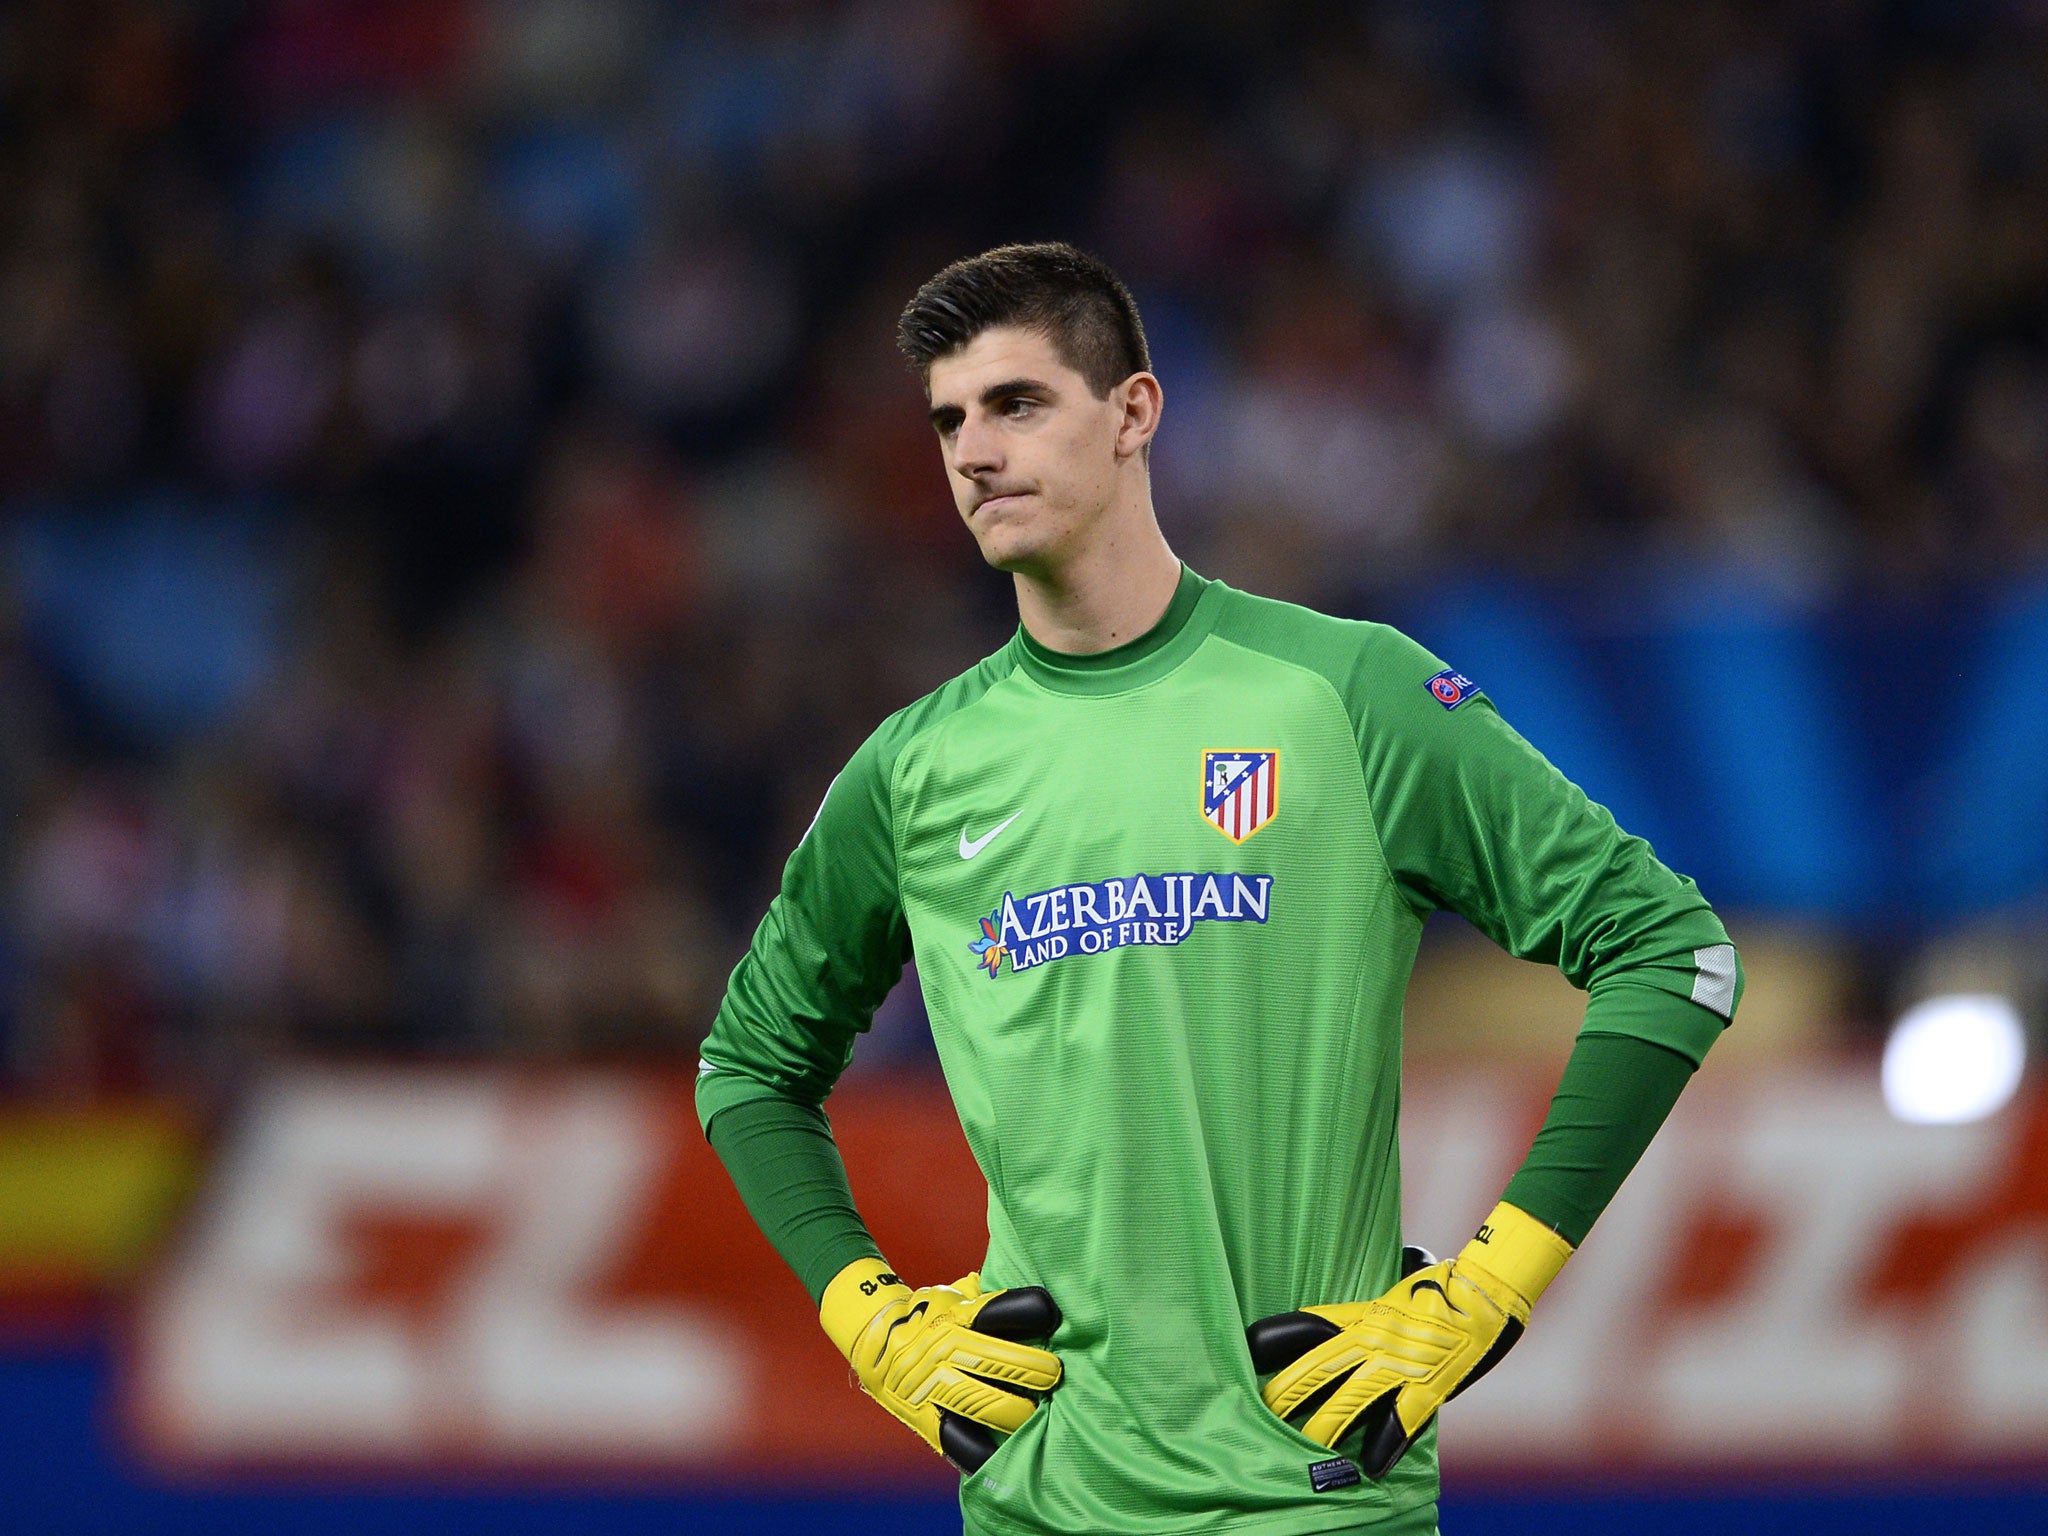 Chelsea's Belgian goalkeeper Thibaut Courtois has been loan at Atletico Madrid since 2011